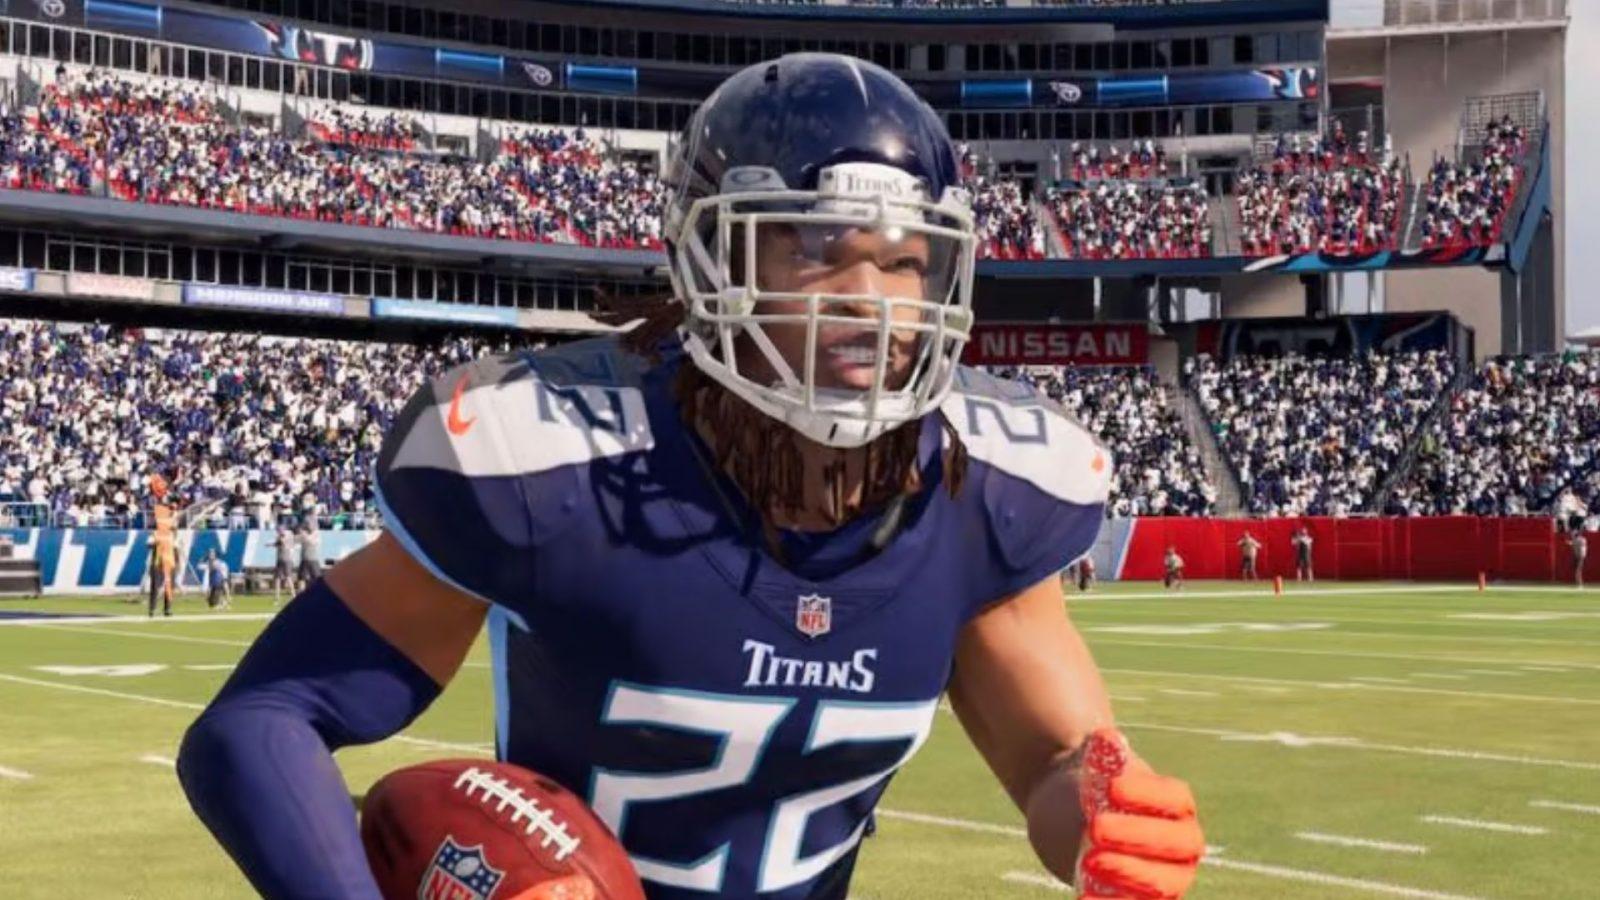 Tennessee titans player running with ball in madden 24